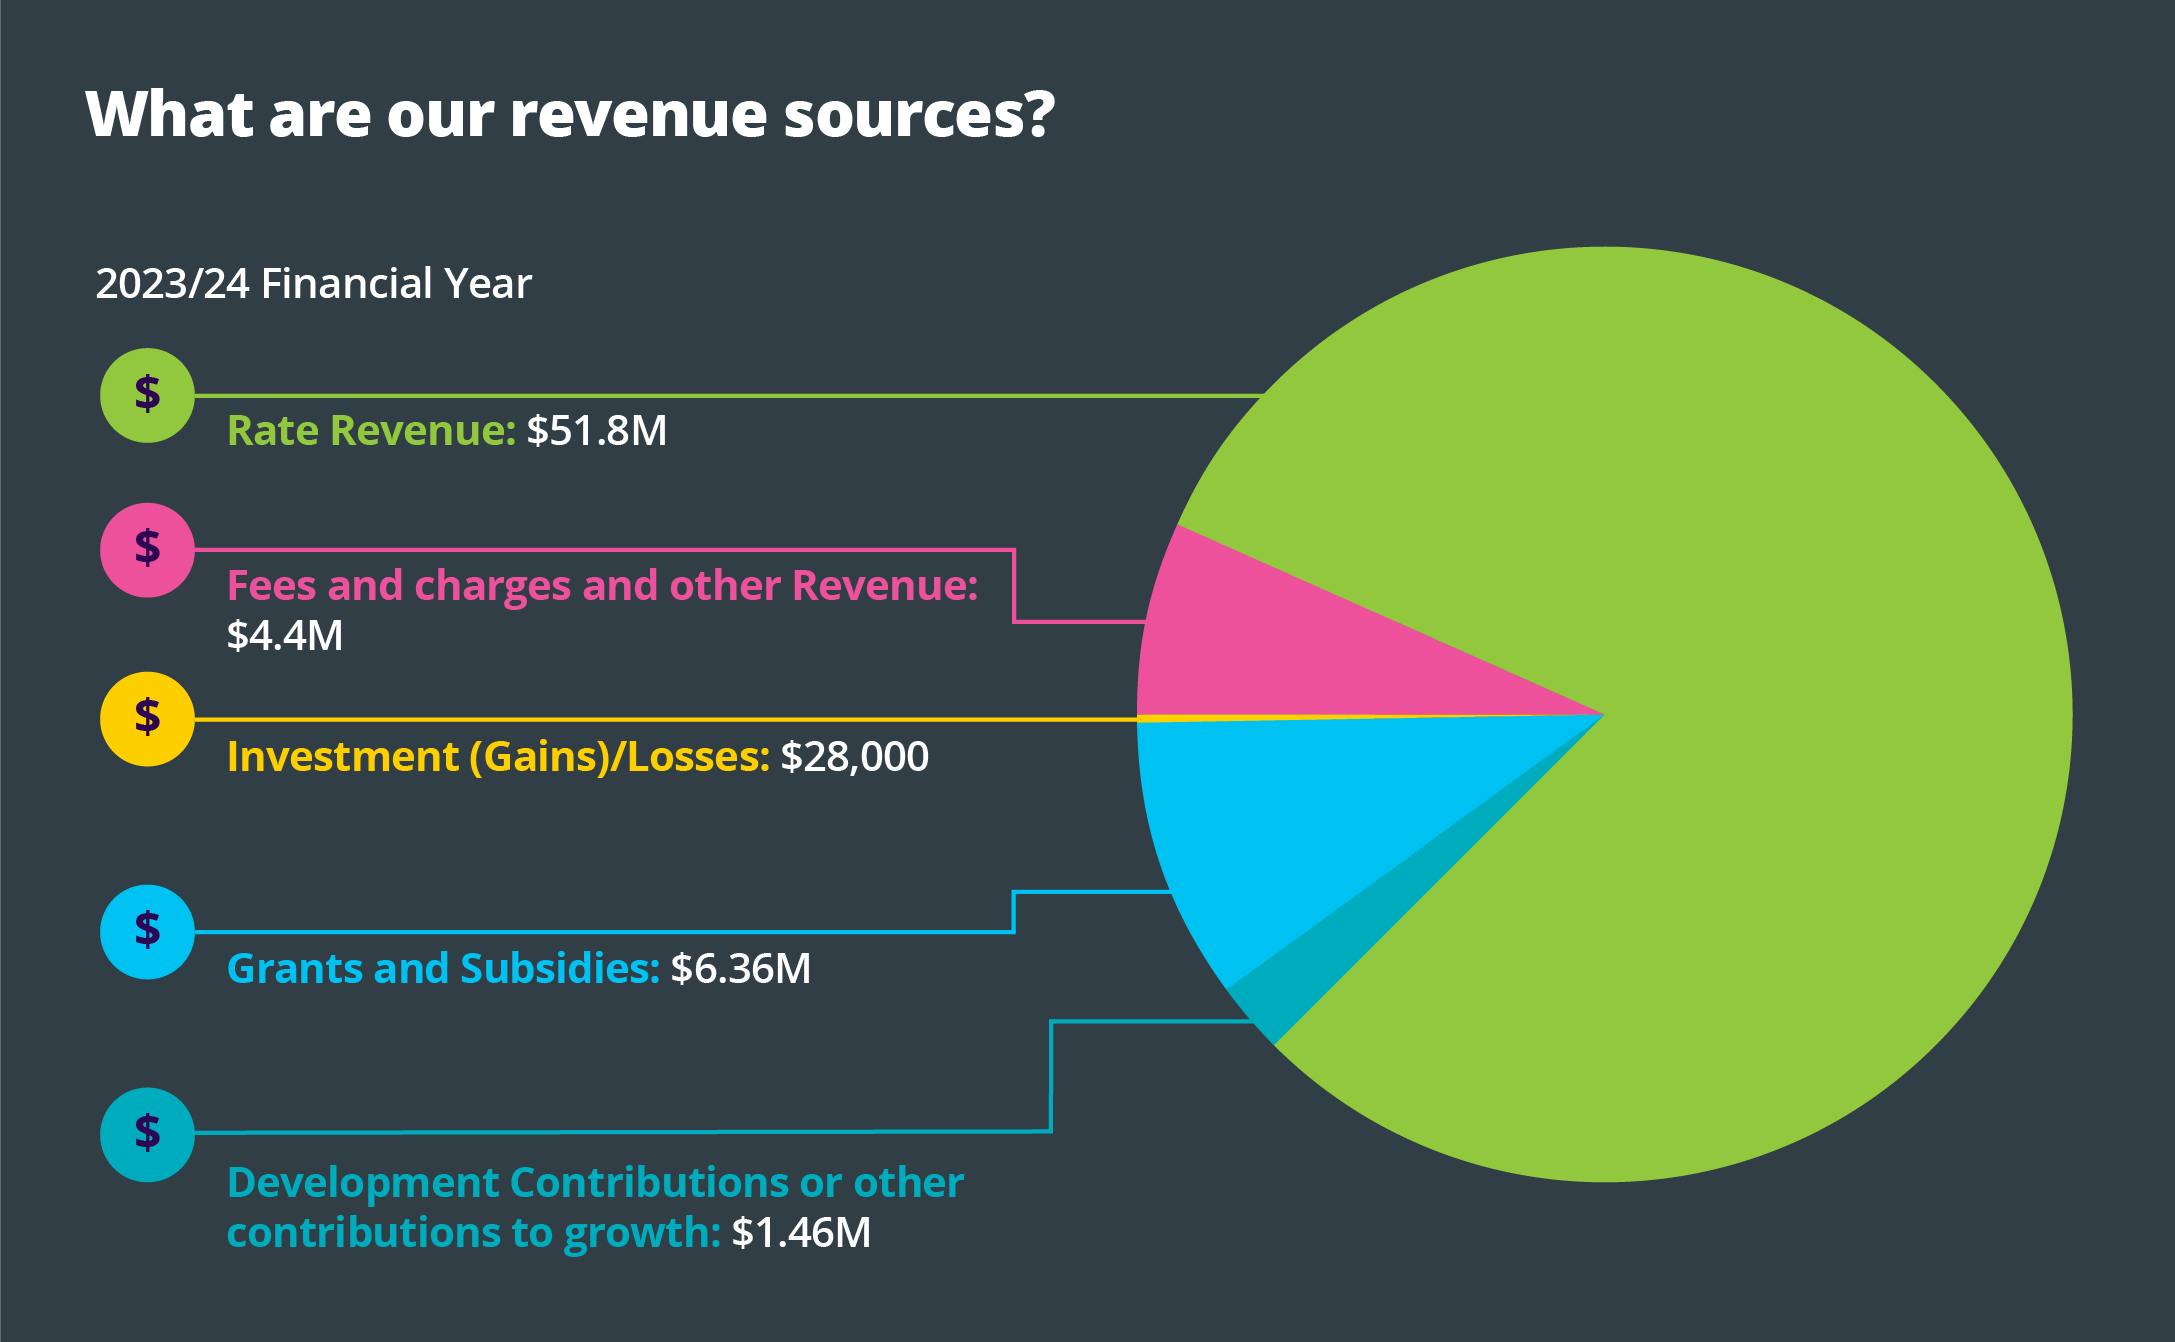 What are our revenue sources?